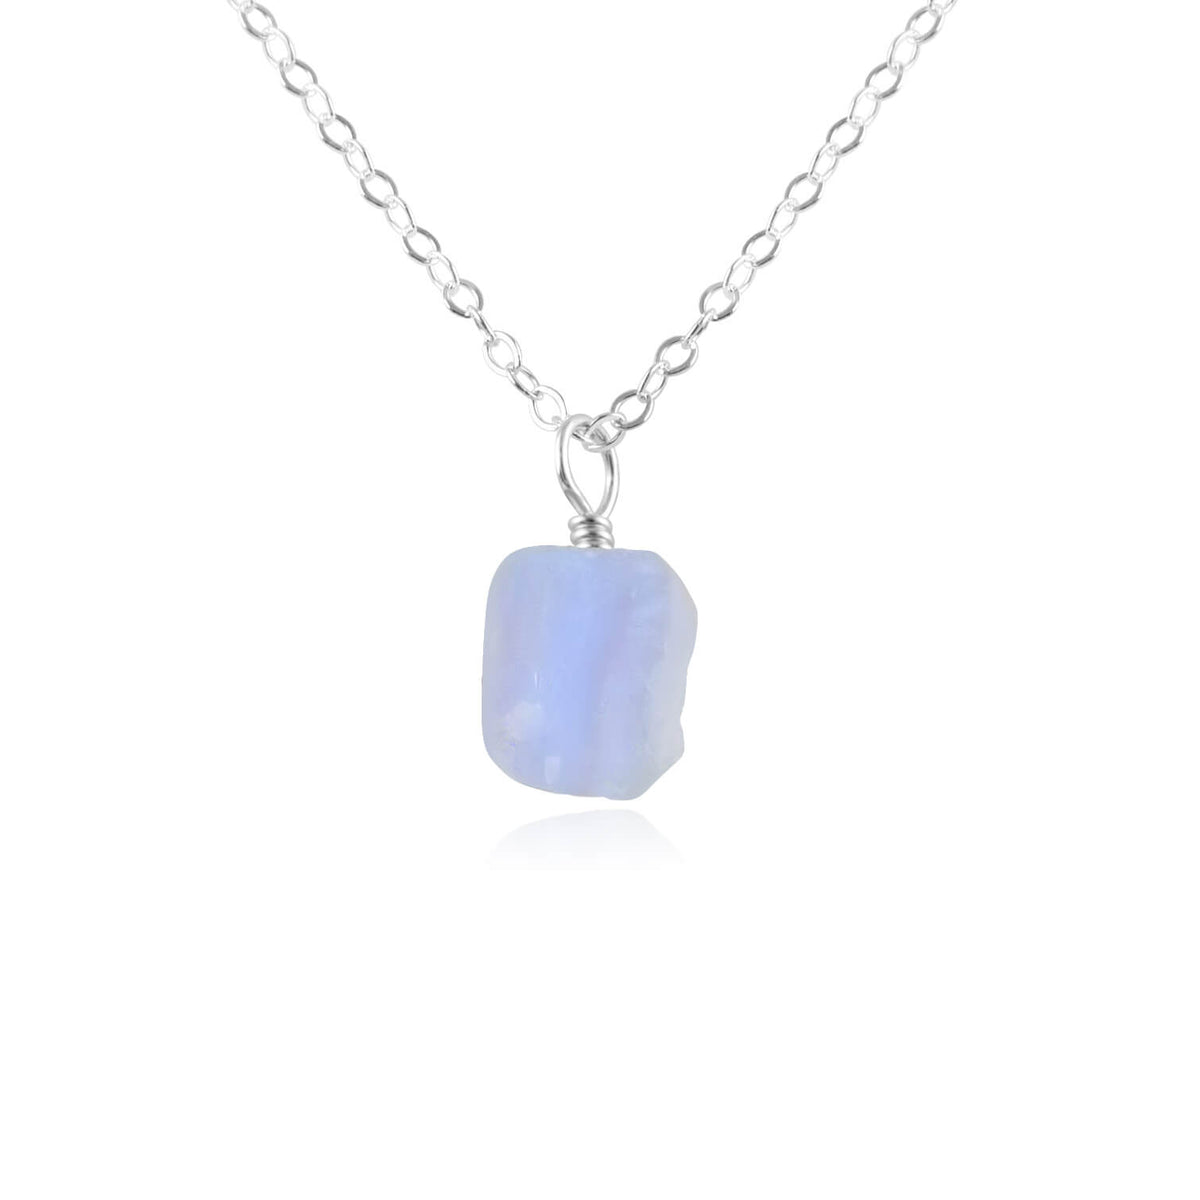 Raw Crystal Pendant Necklace - Blue Lace Agate - Sterling Silver - Luna Tide Handmade Jewellery